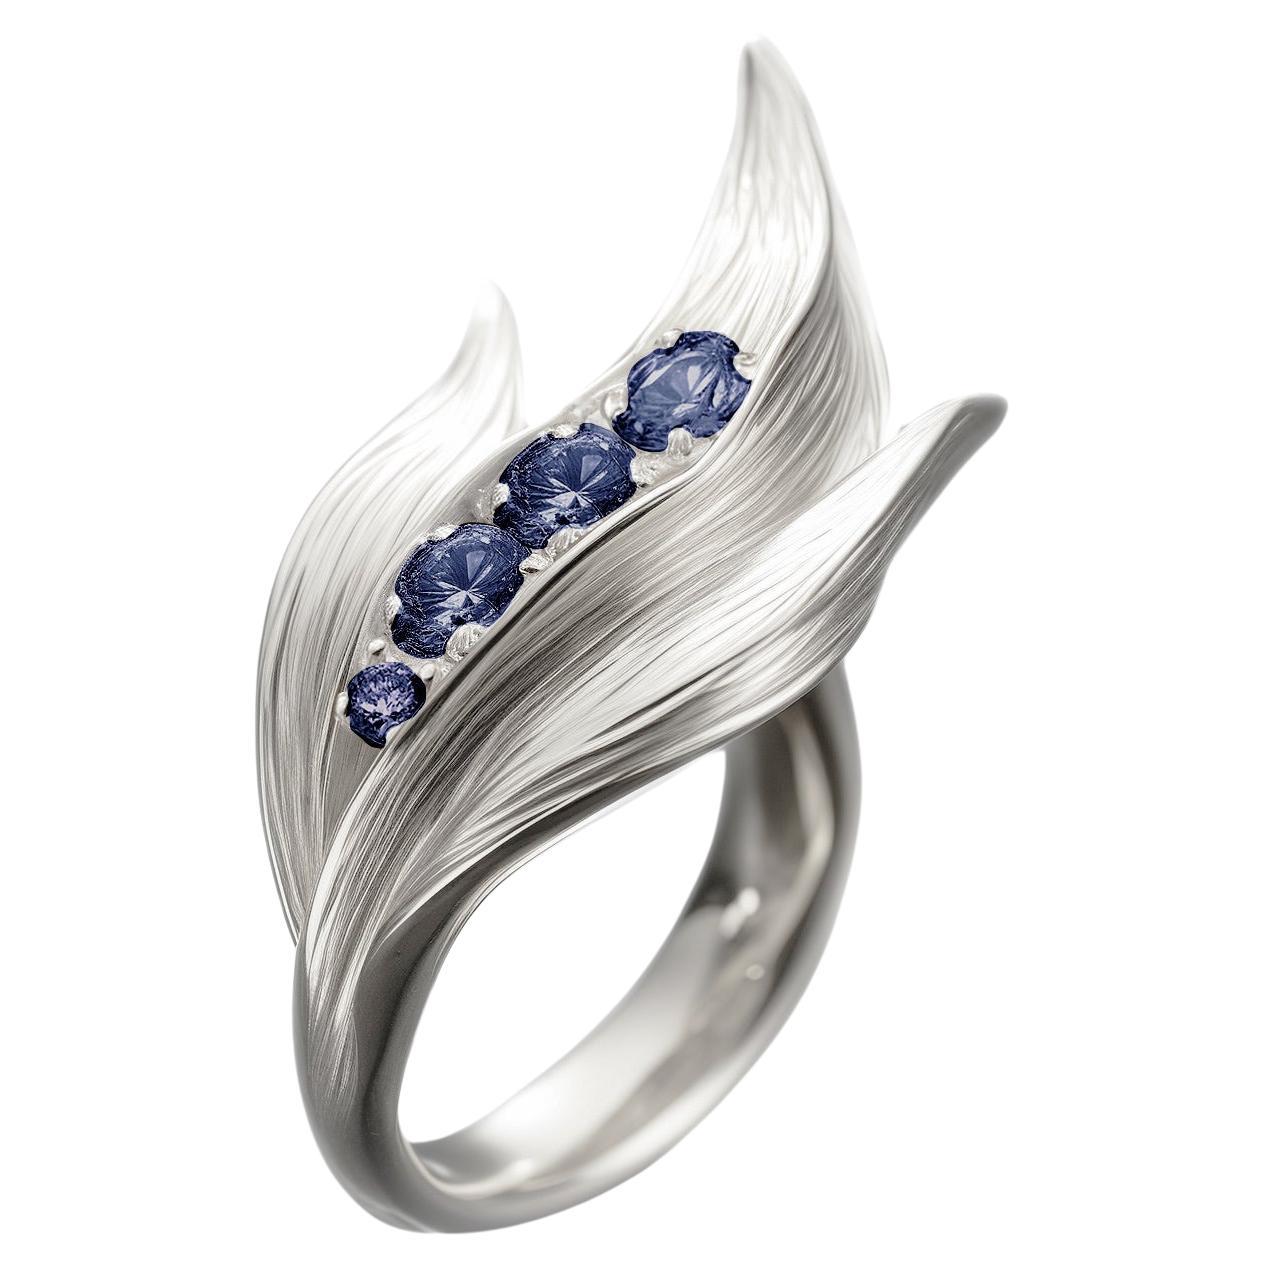 Eighteen Karat White Gold Contemporary Engagement Ring with Sapphires